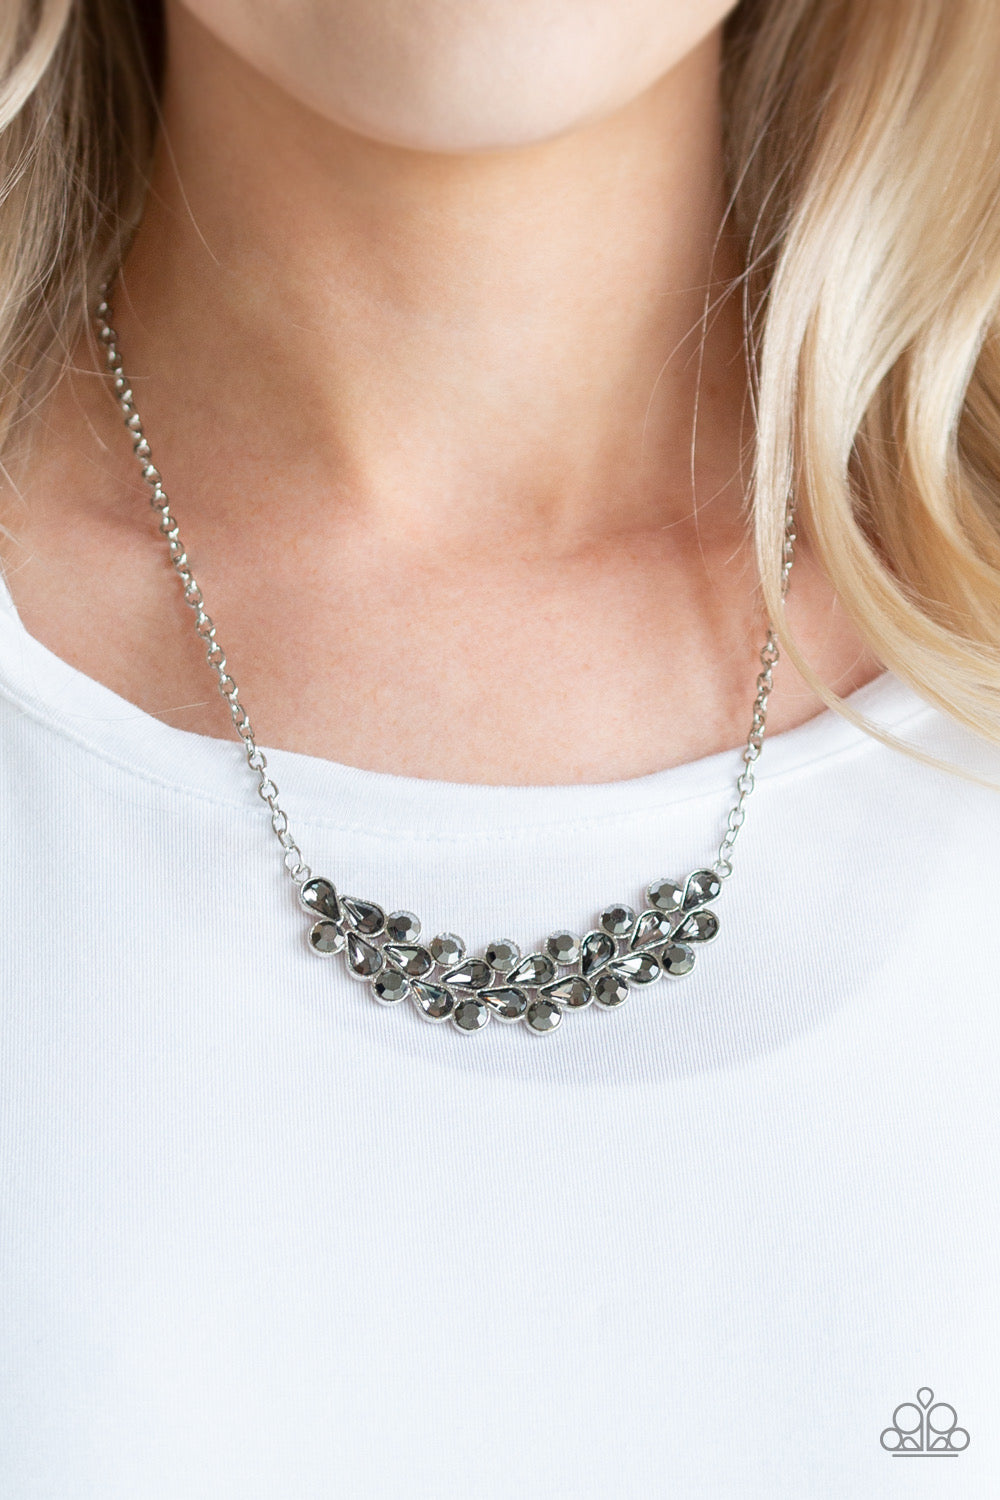 Paparazzi Special Treatment - Silver Necklace